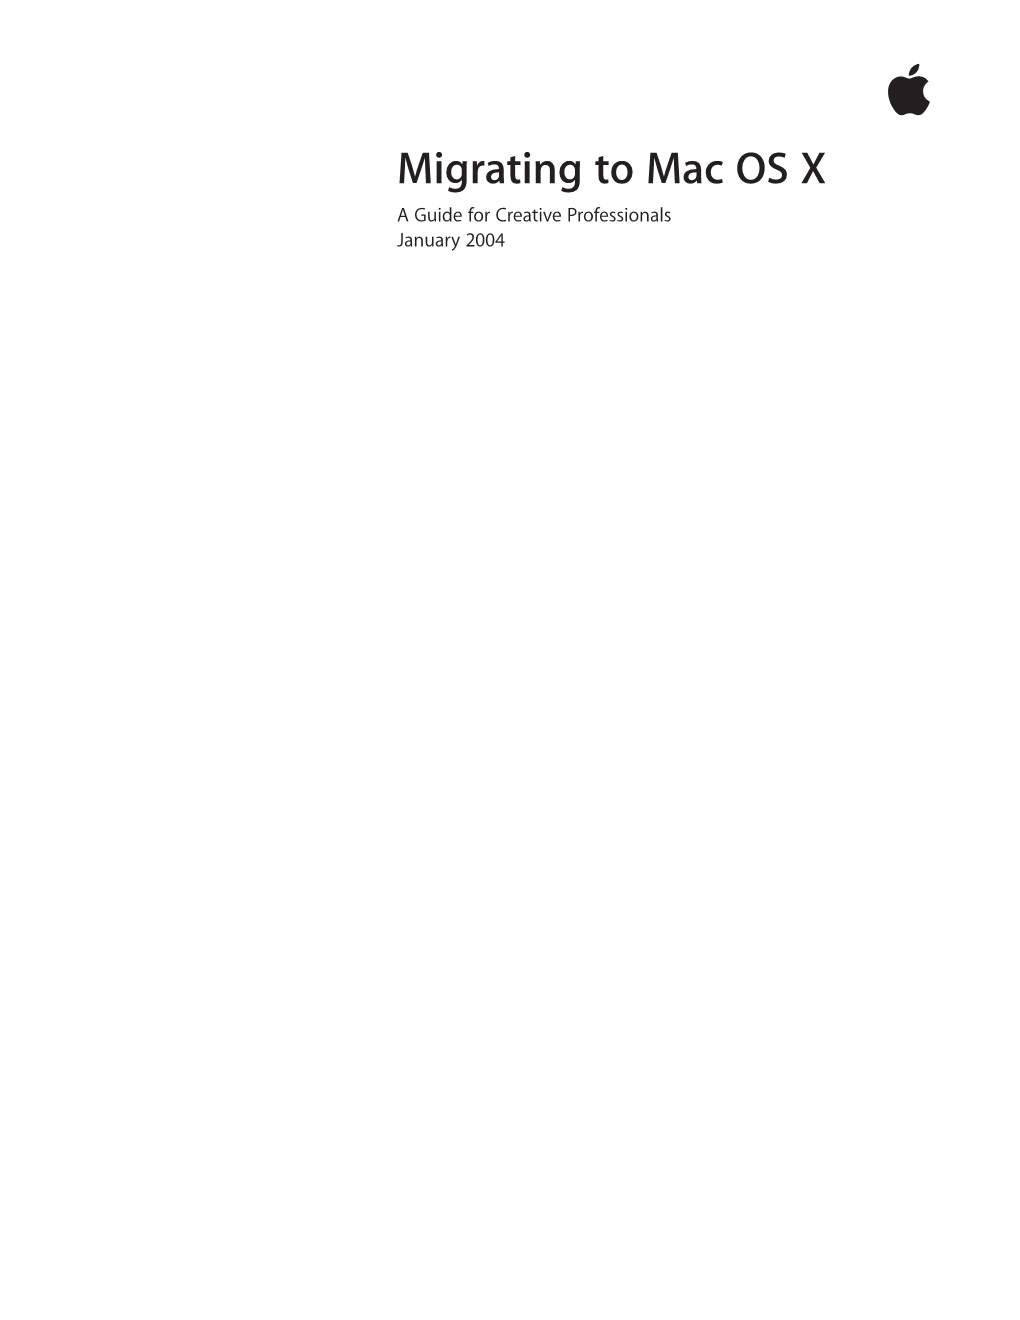 Migrating to Mac OS X a Guide for Creative Professionals January 2004 Guide for Creative Professionals 2 Migrating to Mac OS X